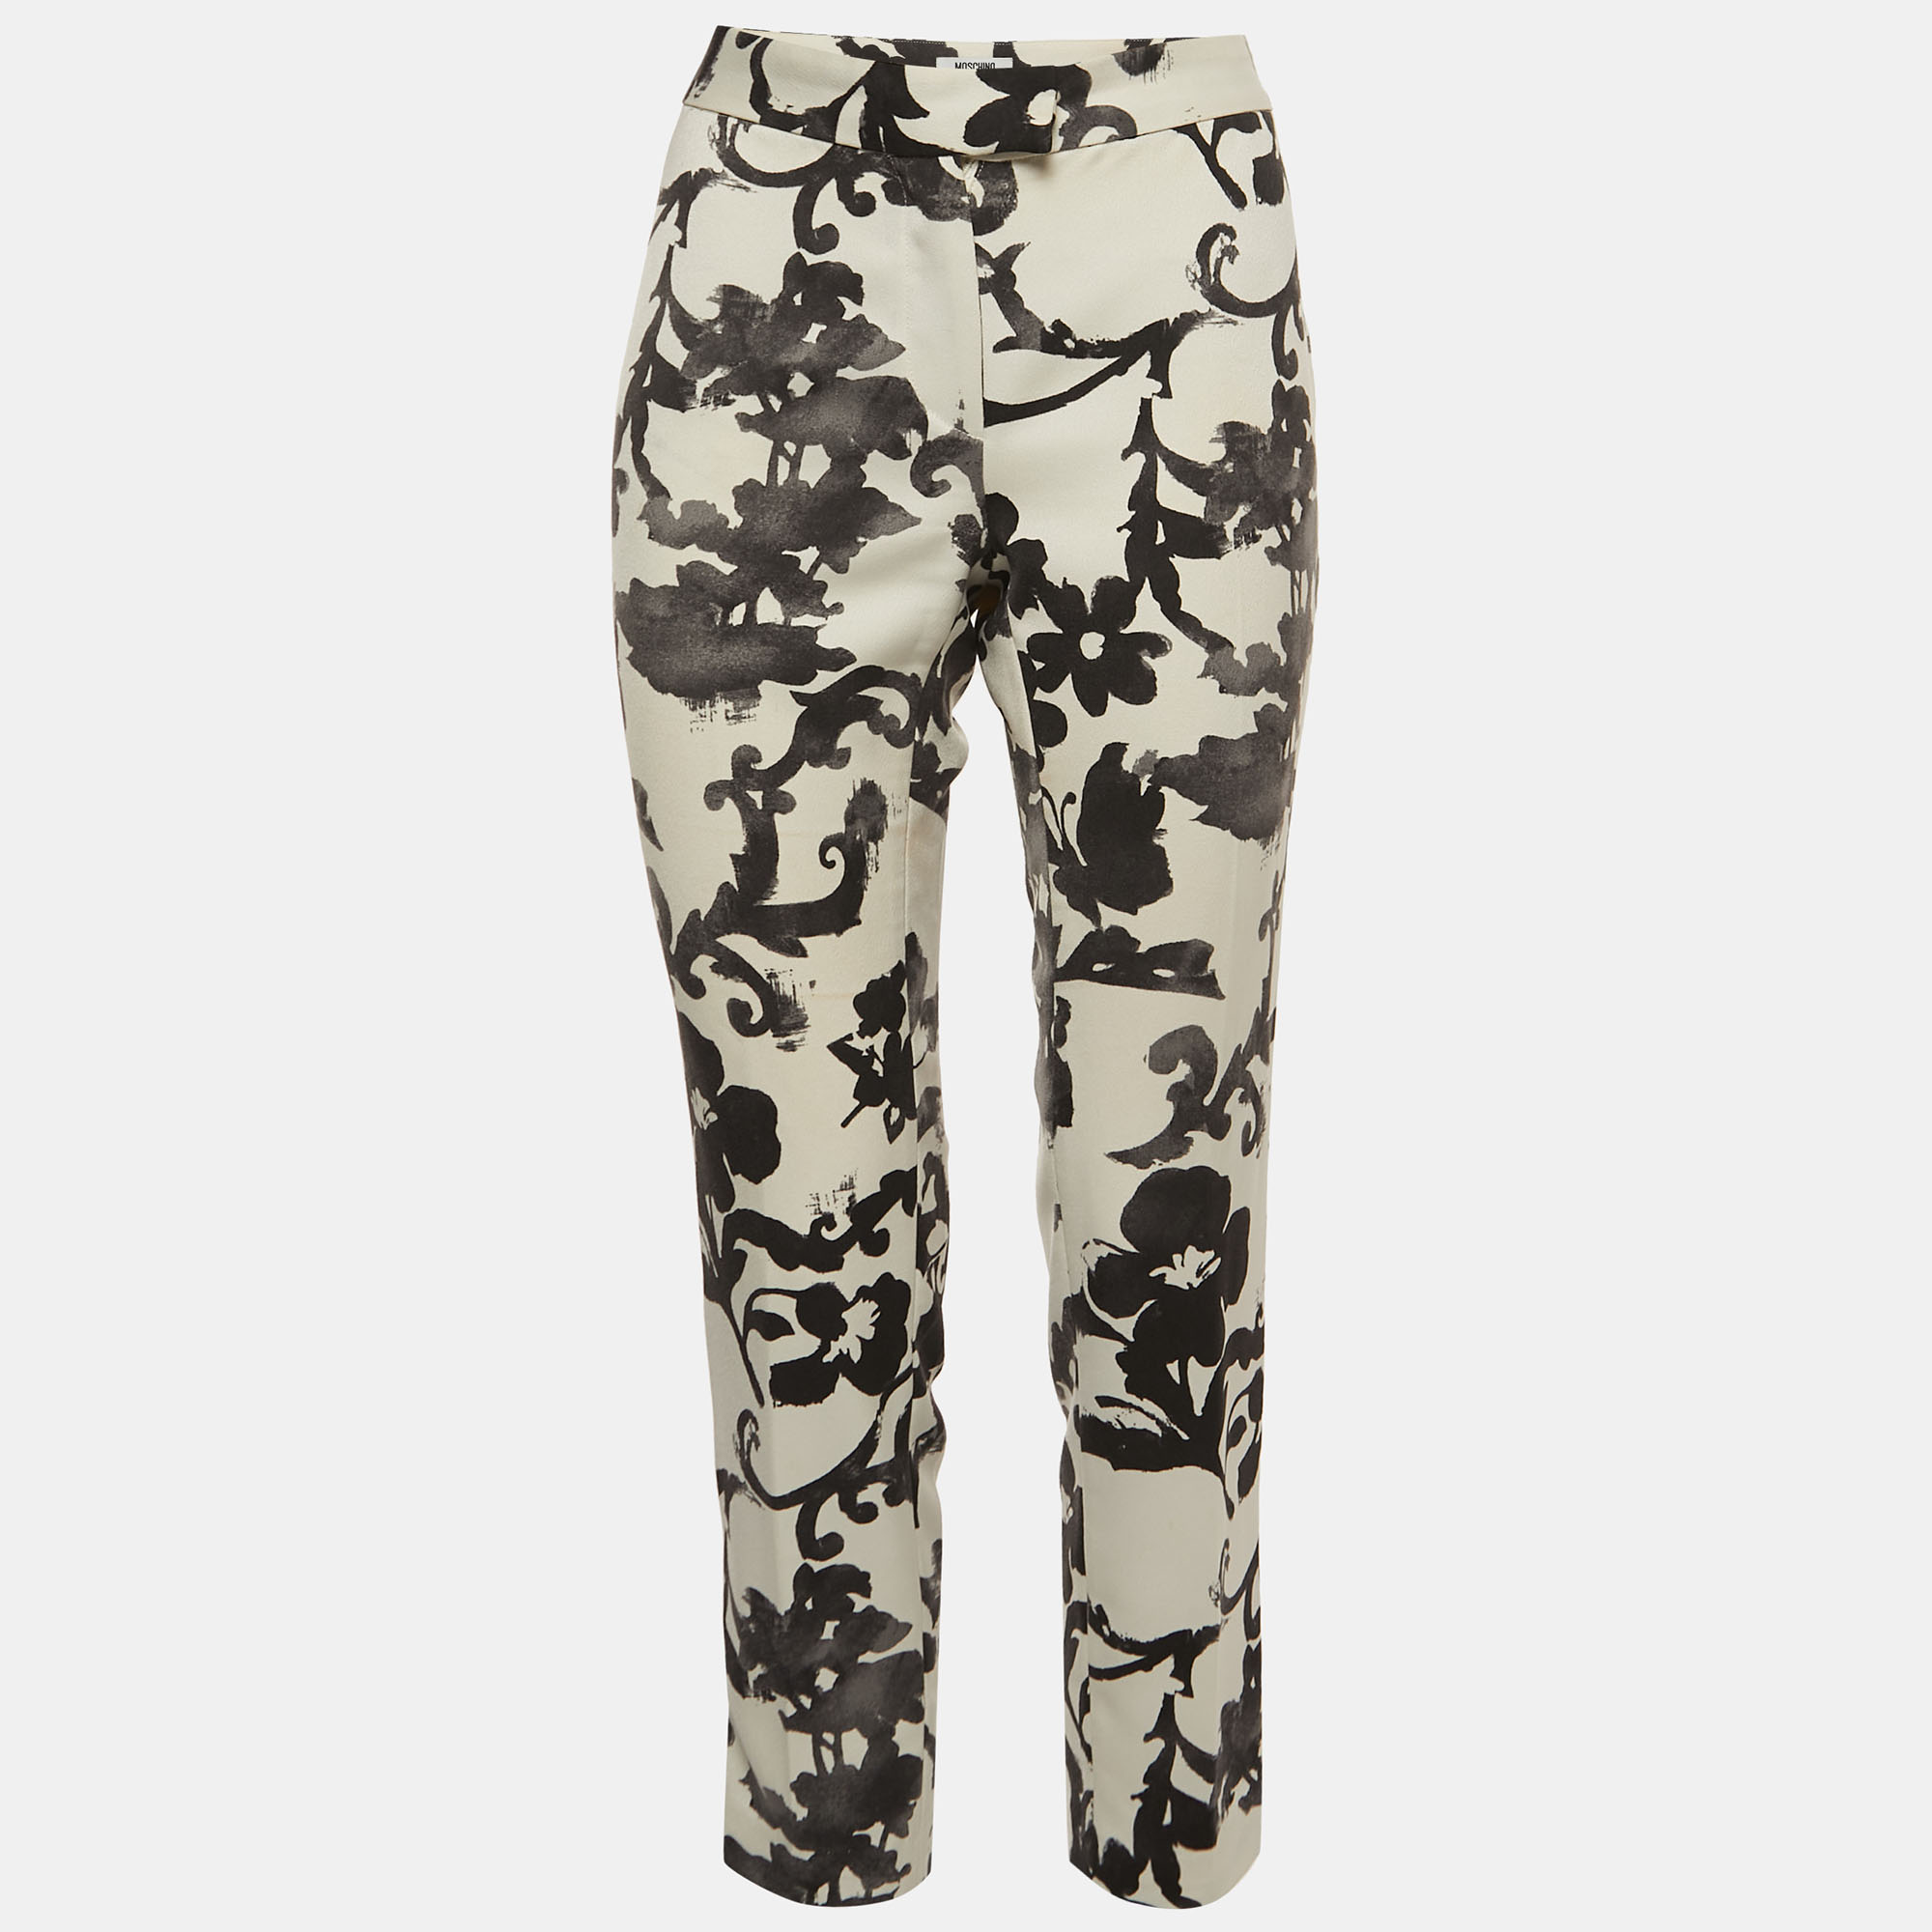 

Moschino Off-White/Black Floral Print Crepe Trousers